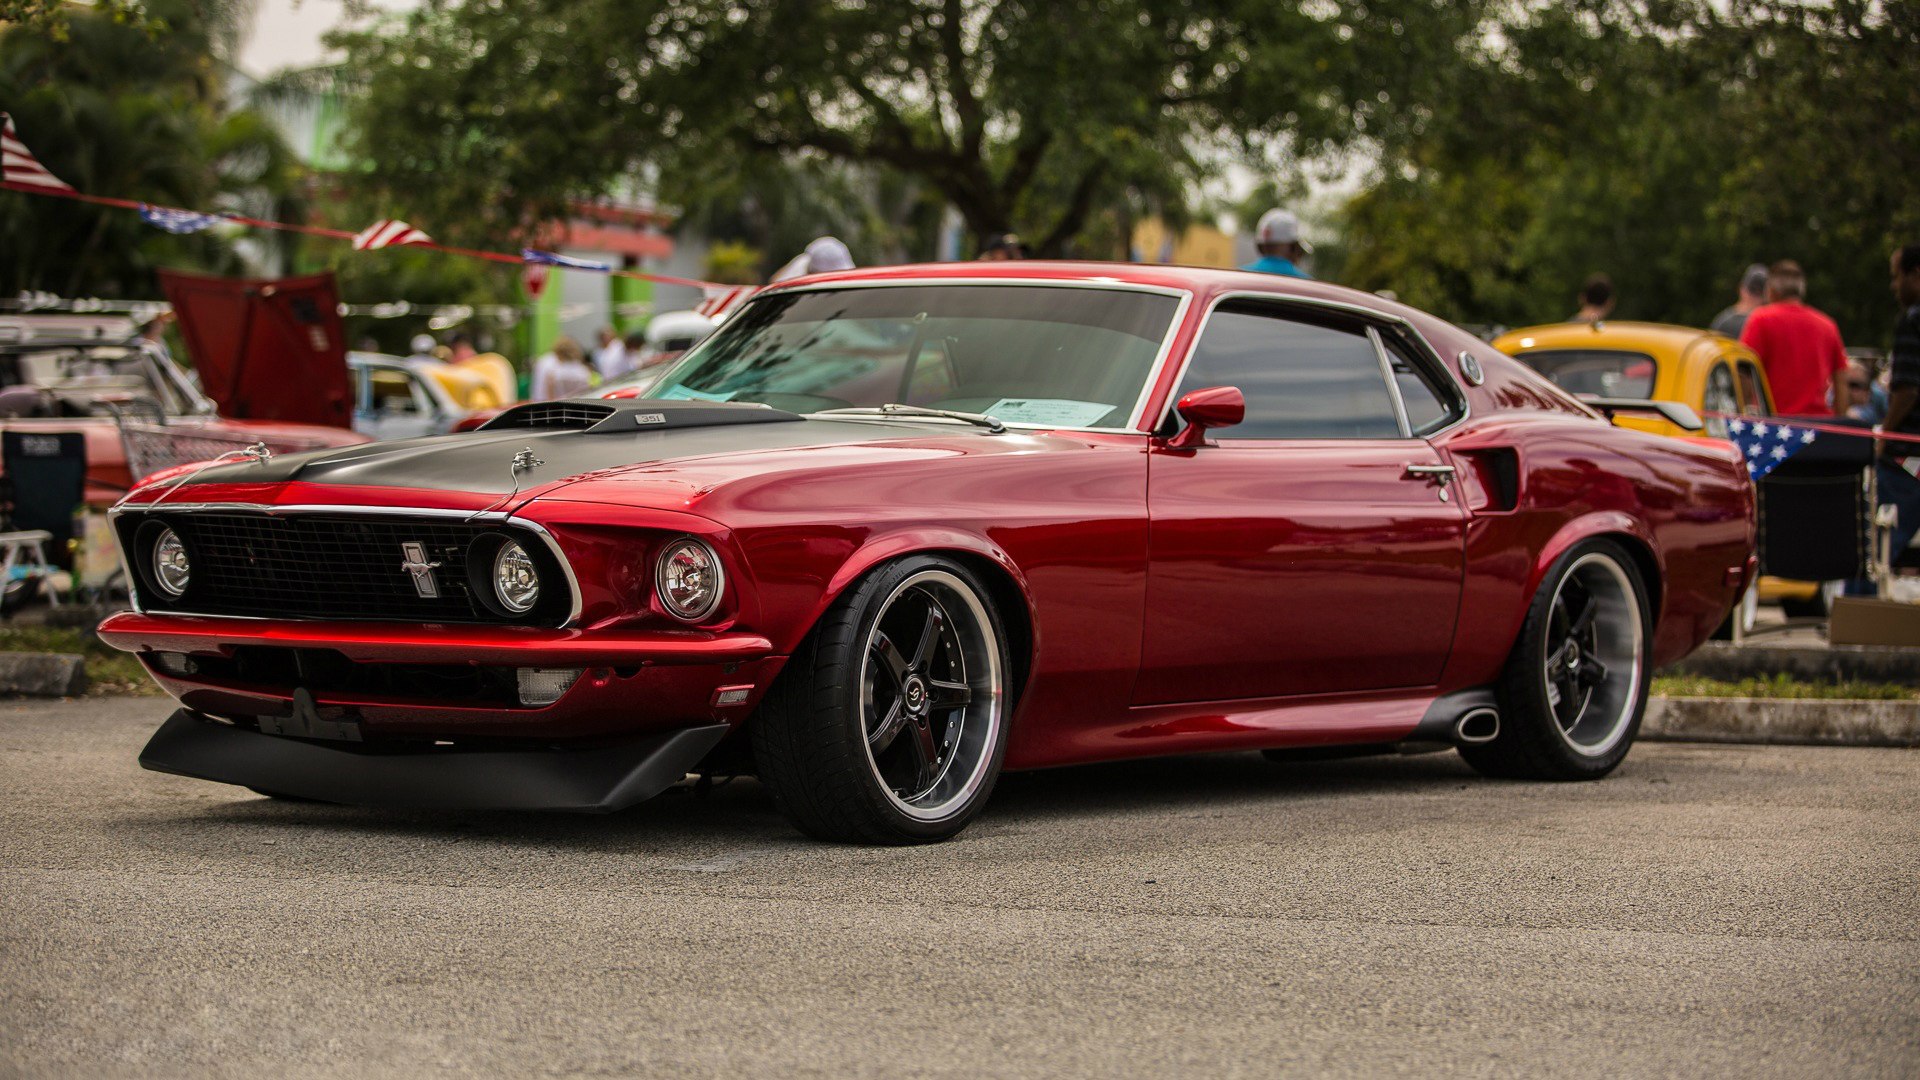 Car Ford Mustang Fastback 351 wallpapers and images - wallpapers ...